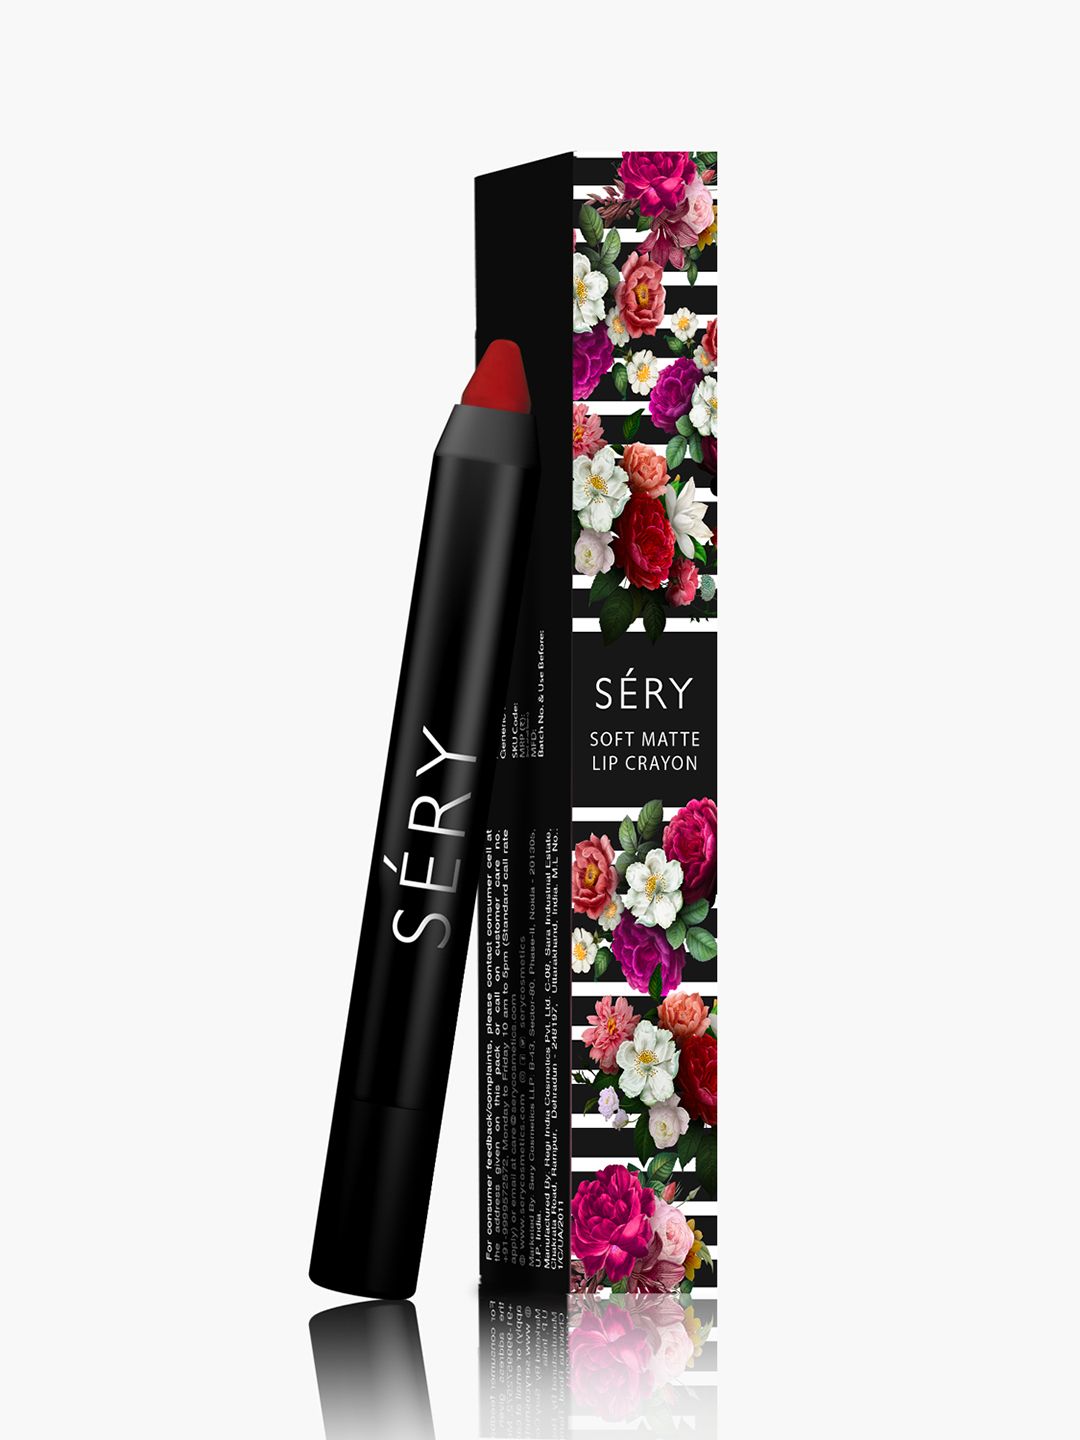 SERY Soft Matte Lip Crayon with Creamy Matte Texture 2.4 g - Endless Plum Price in India